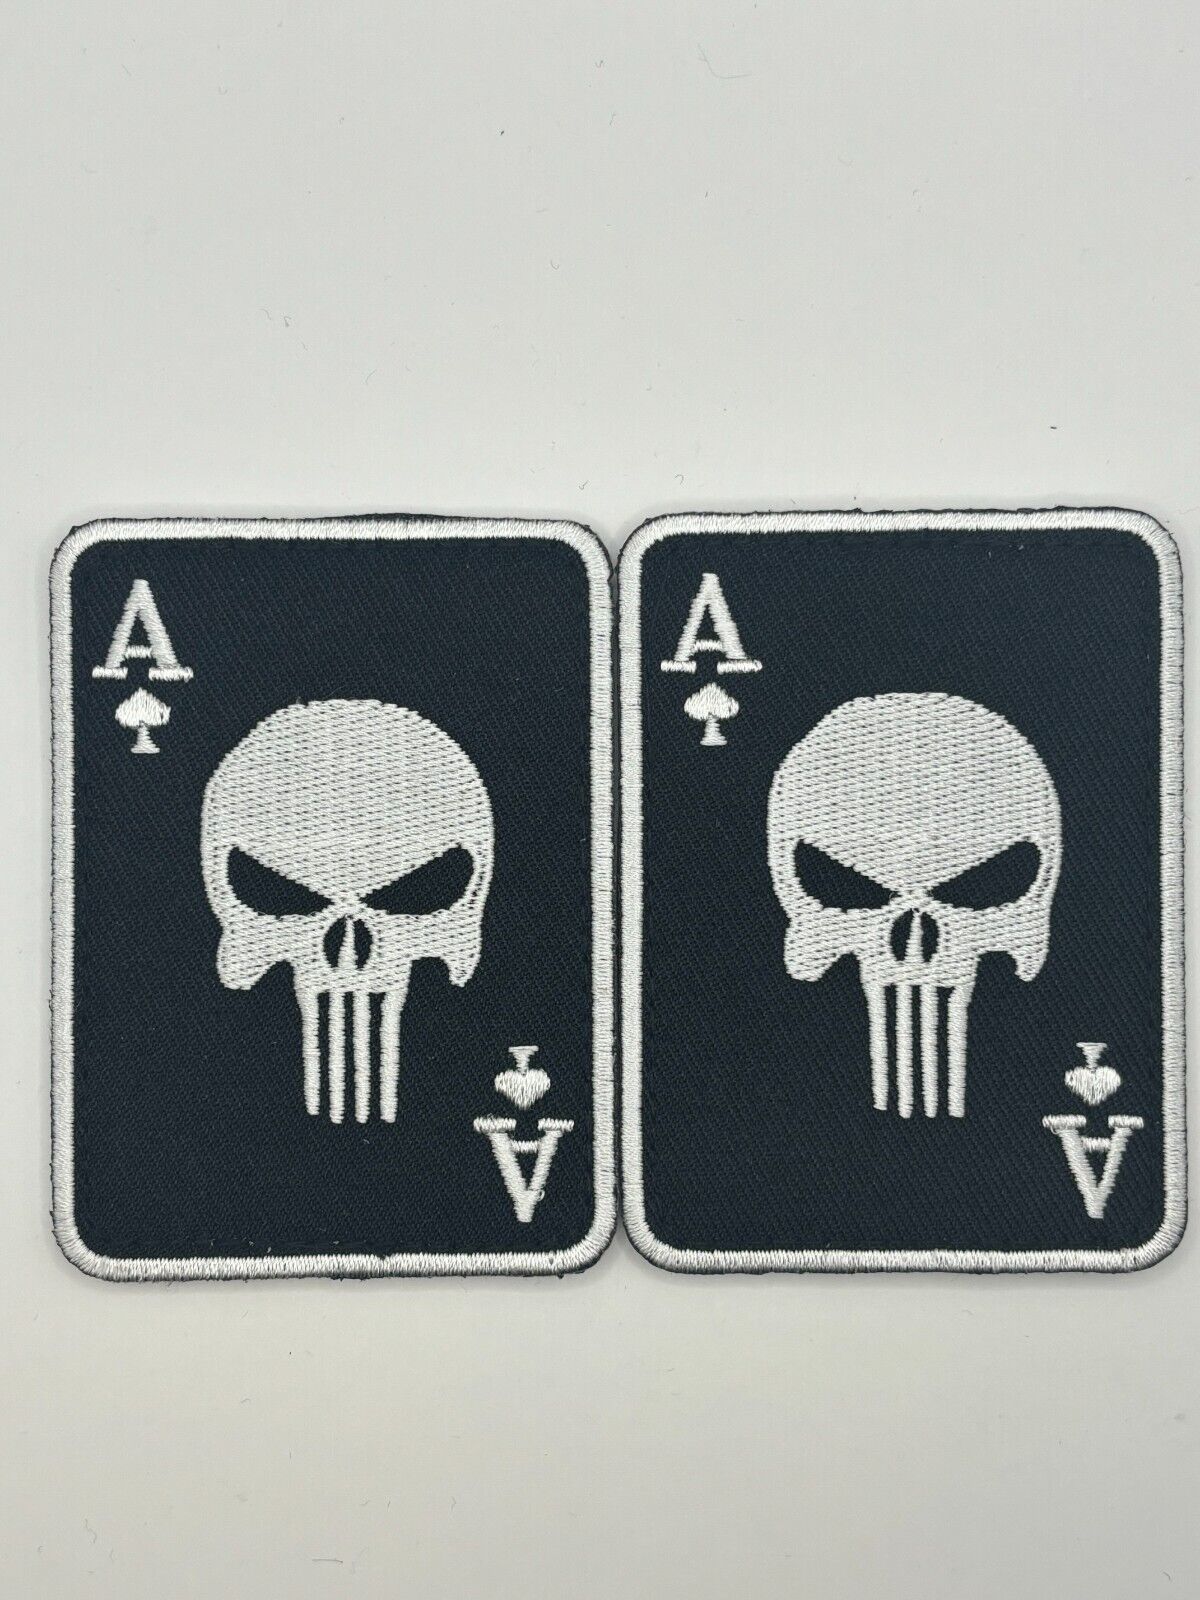 2 PIECE ACE OF SPADES DEATH CARD VIETNAM MILITARY EMBROIDERED Hook PATCH